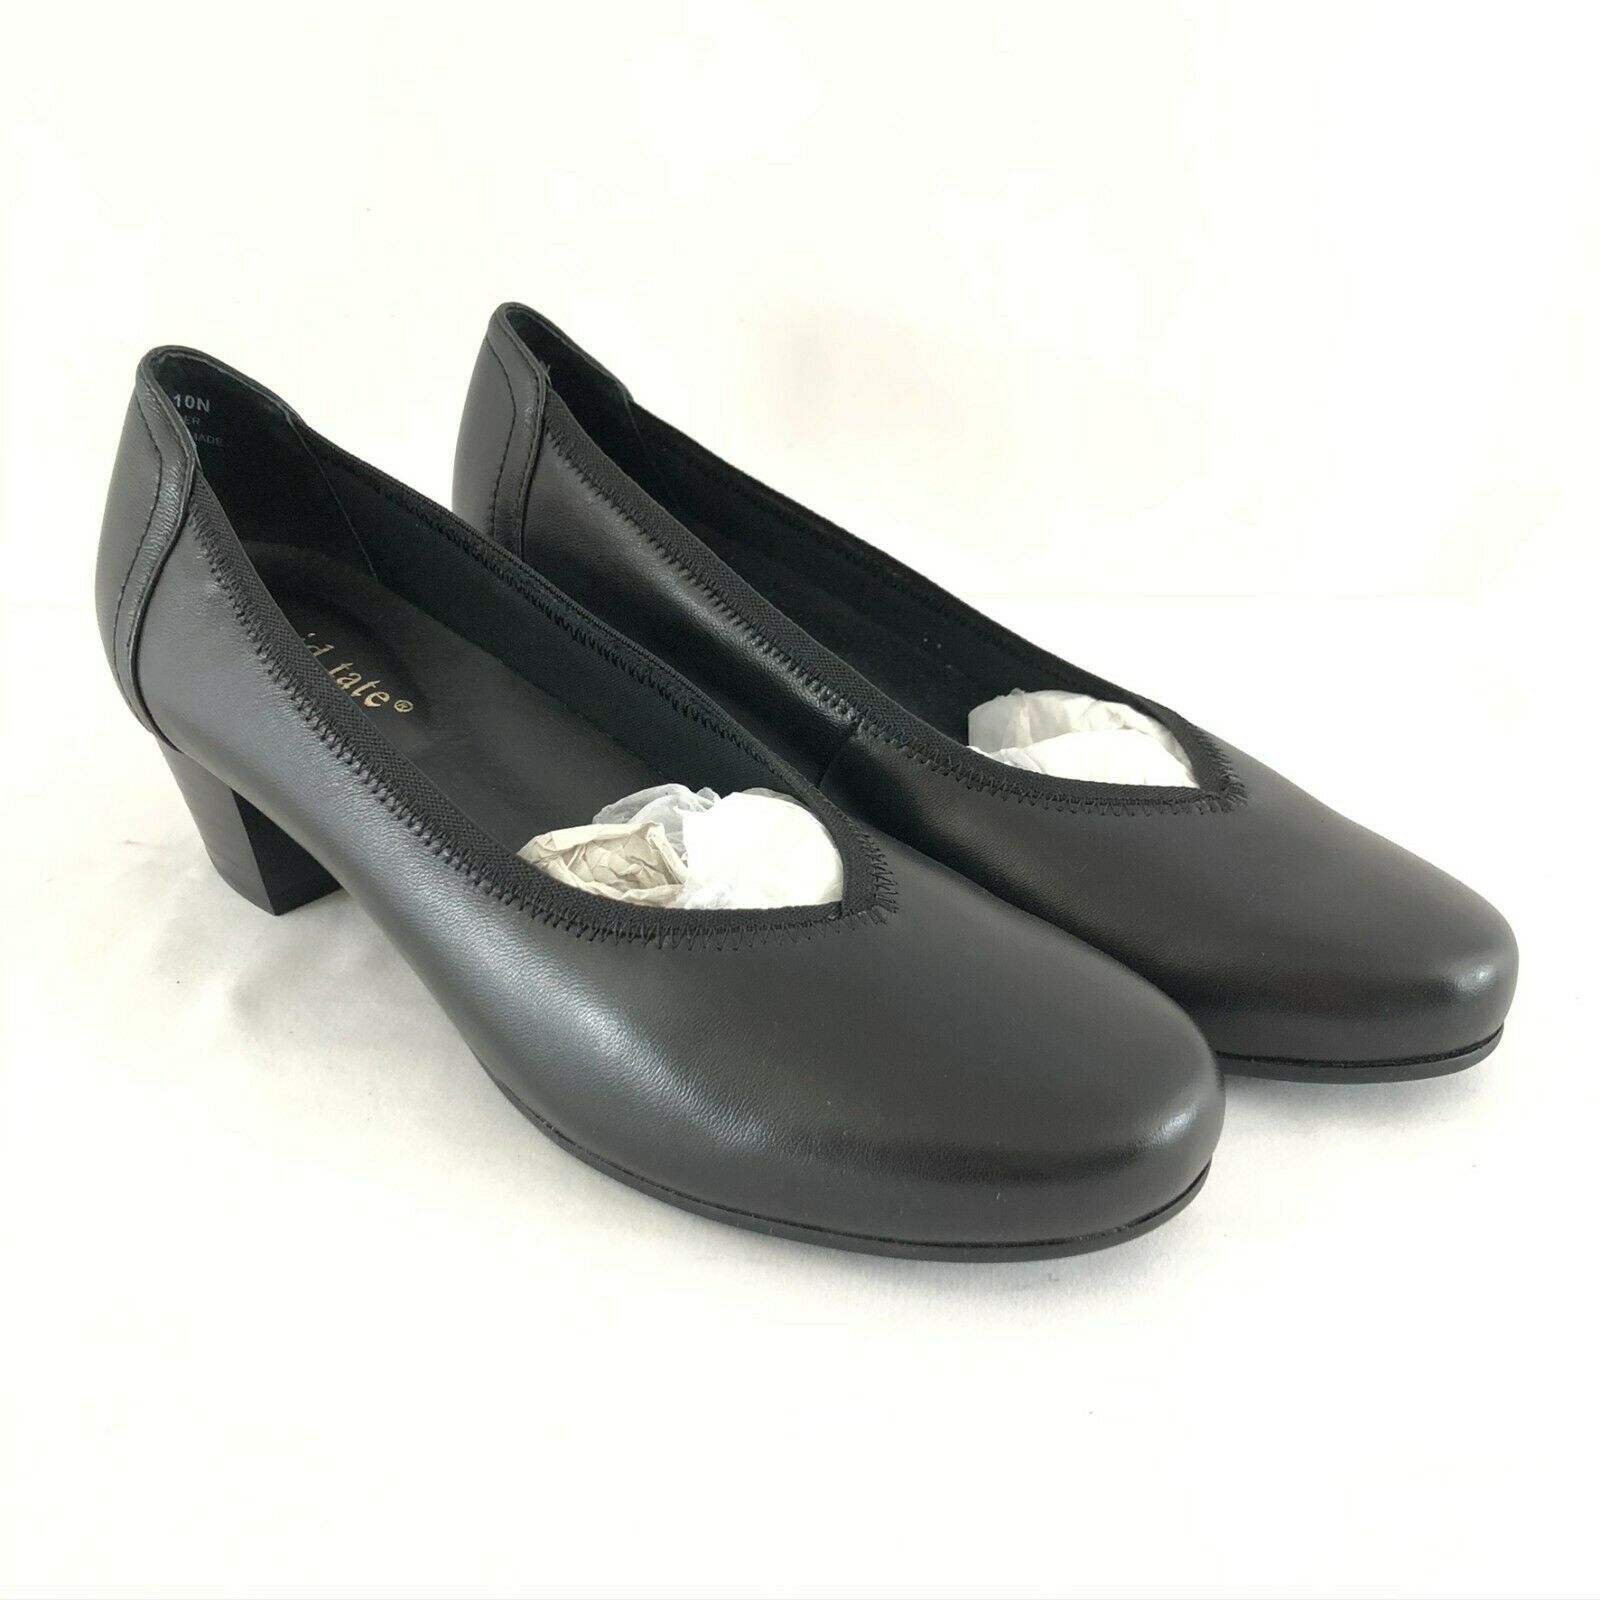 Primary image for David Tate Womens Pumps Block Heels Leather Black Slip On Size 10N Narrow